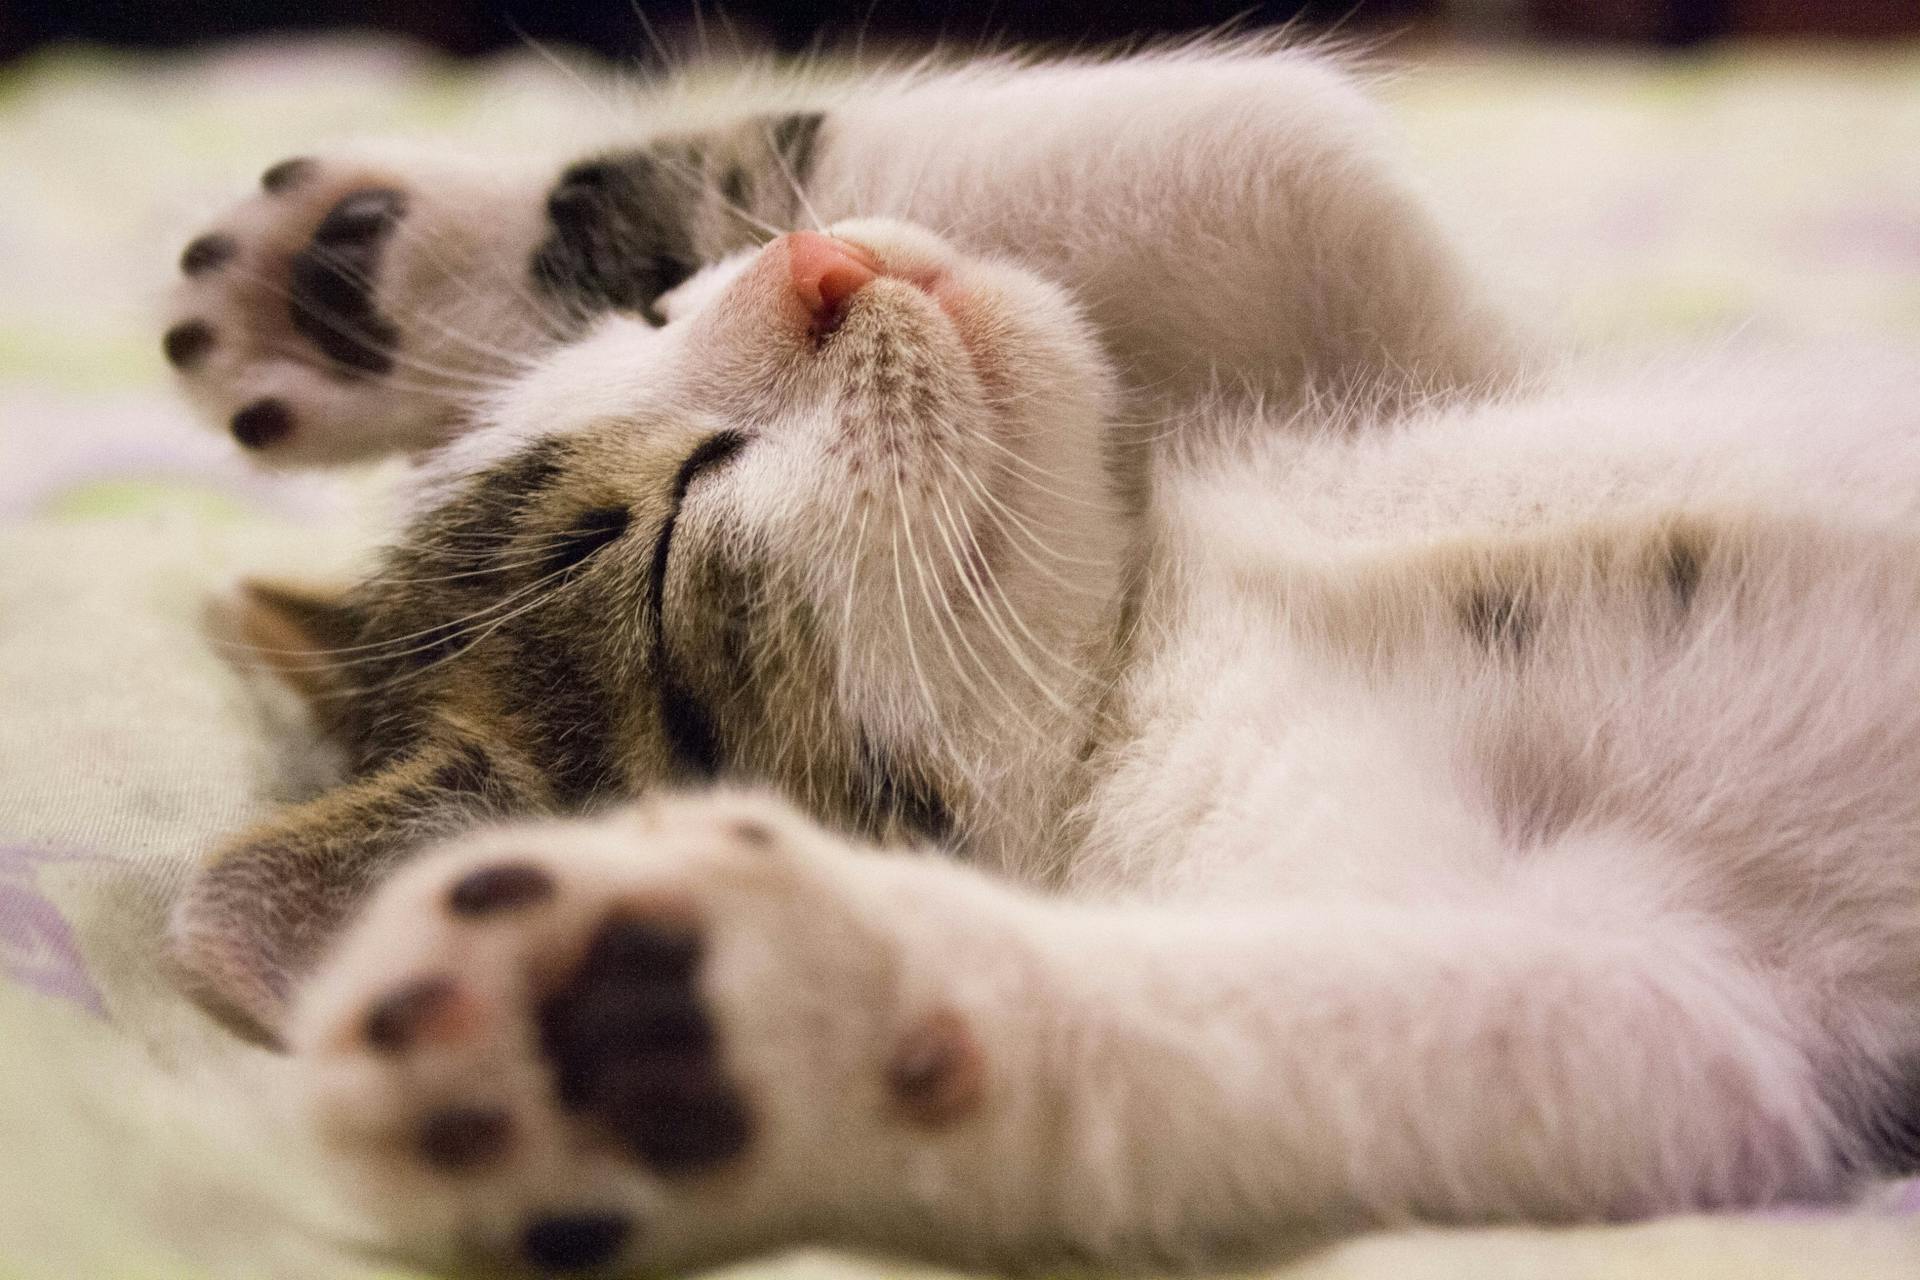 A cat sleeping on a blanket with paws above their head